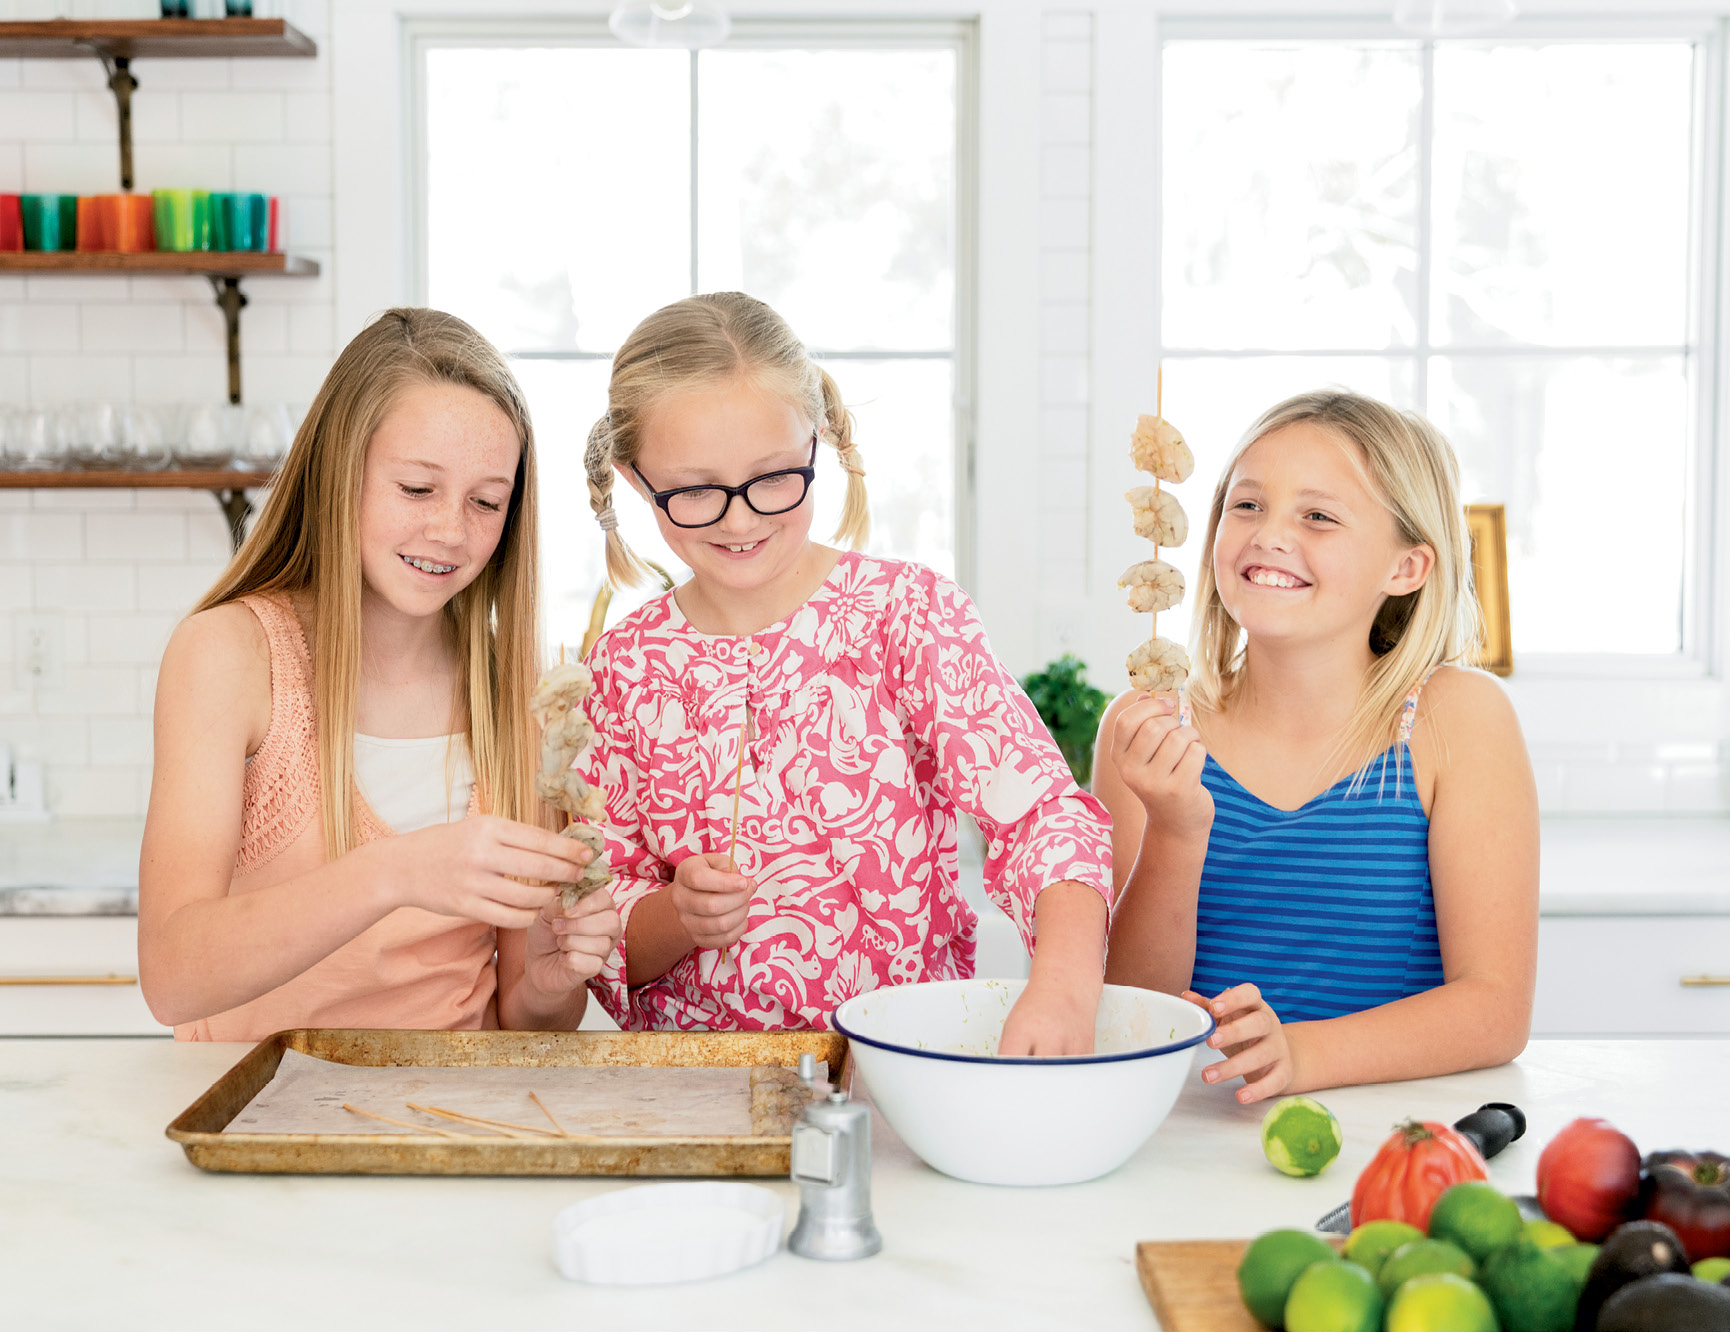 “We live two blocks from the best seafood around,” says Carrie Morey, who sends her daughters, Caroline, Cate, and Sarah to Shem Creek to buy shrimp.